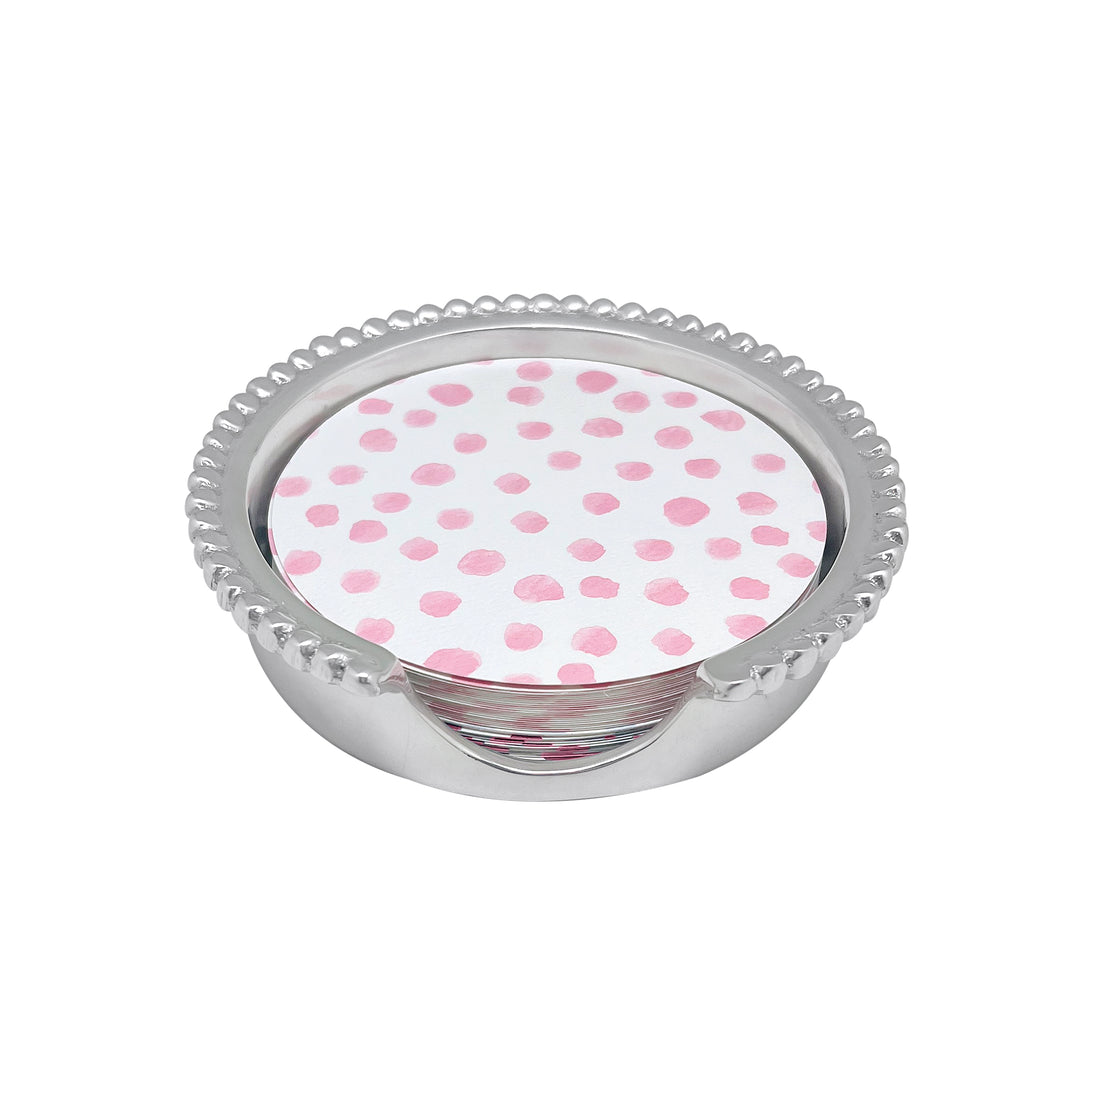 Pink Dotty and Stripe Beaded Coaster Set